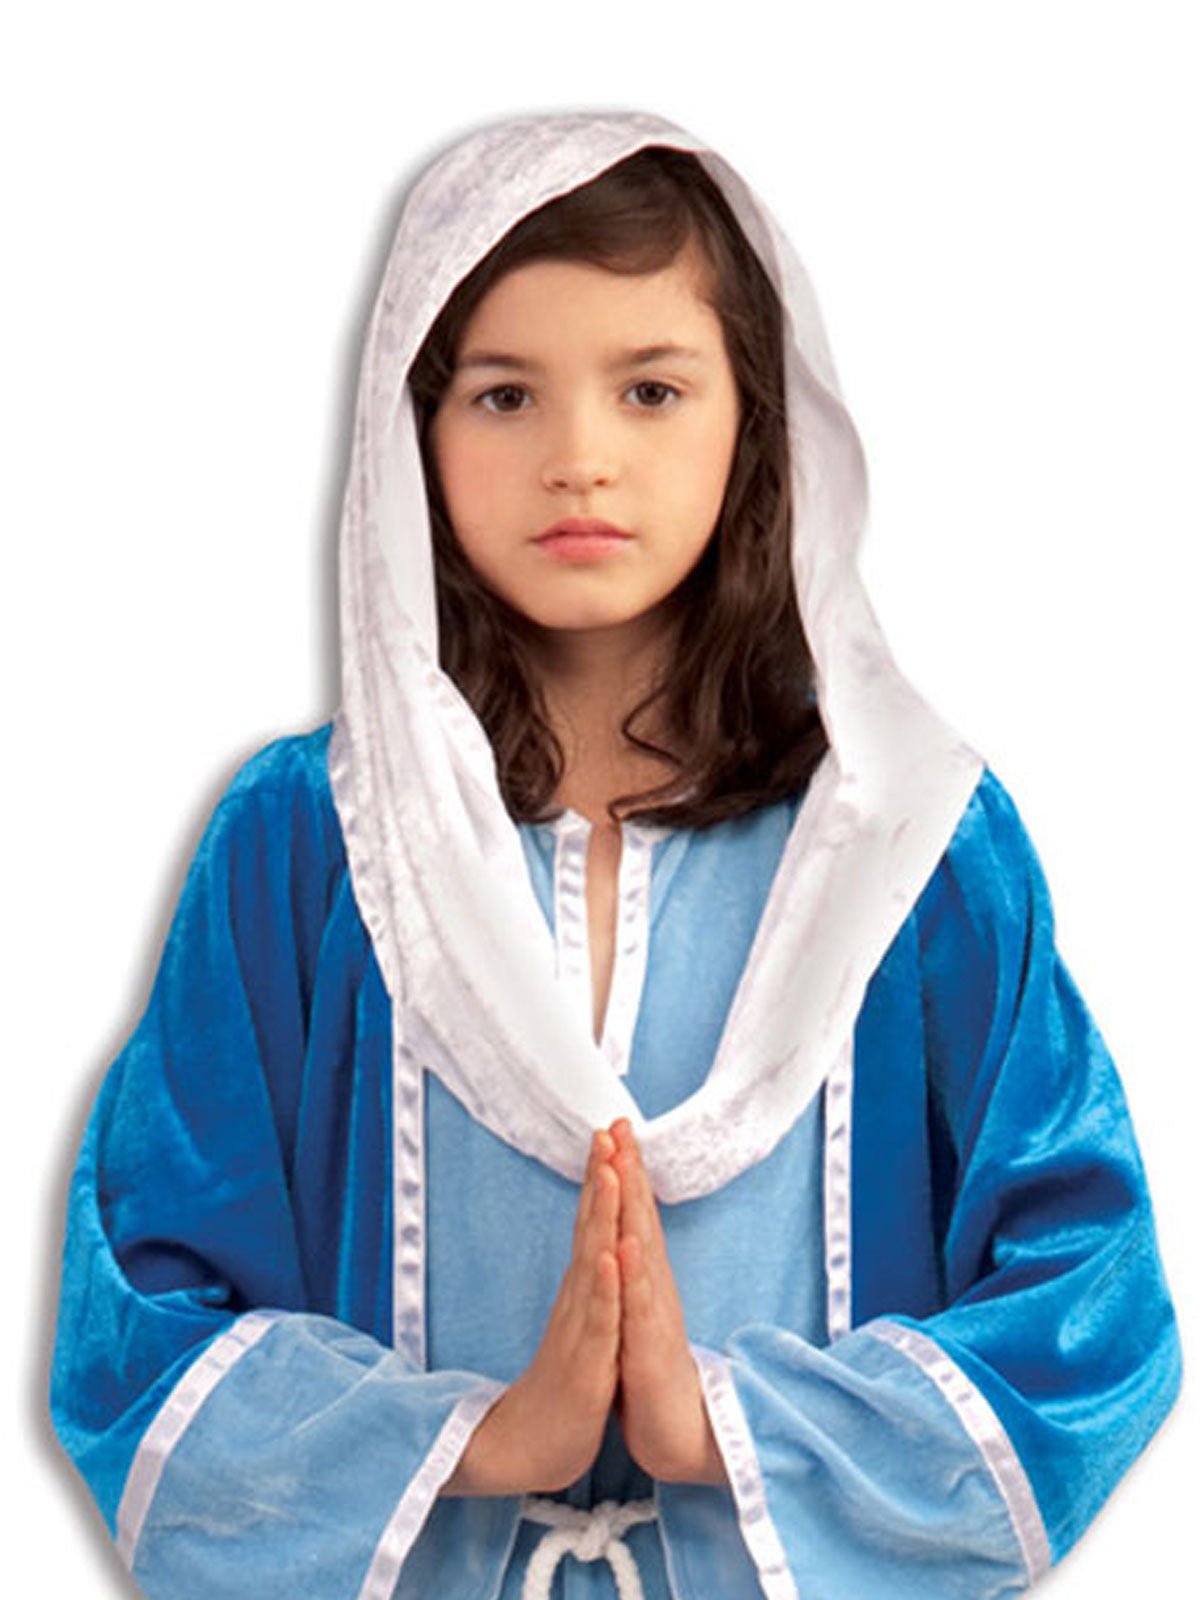 Mary Costume - One Size